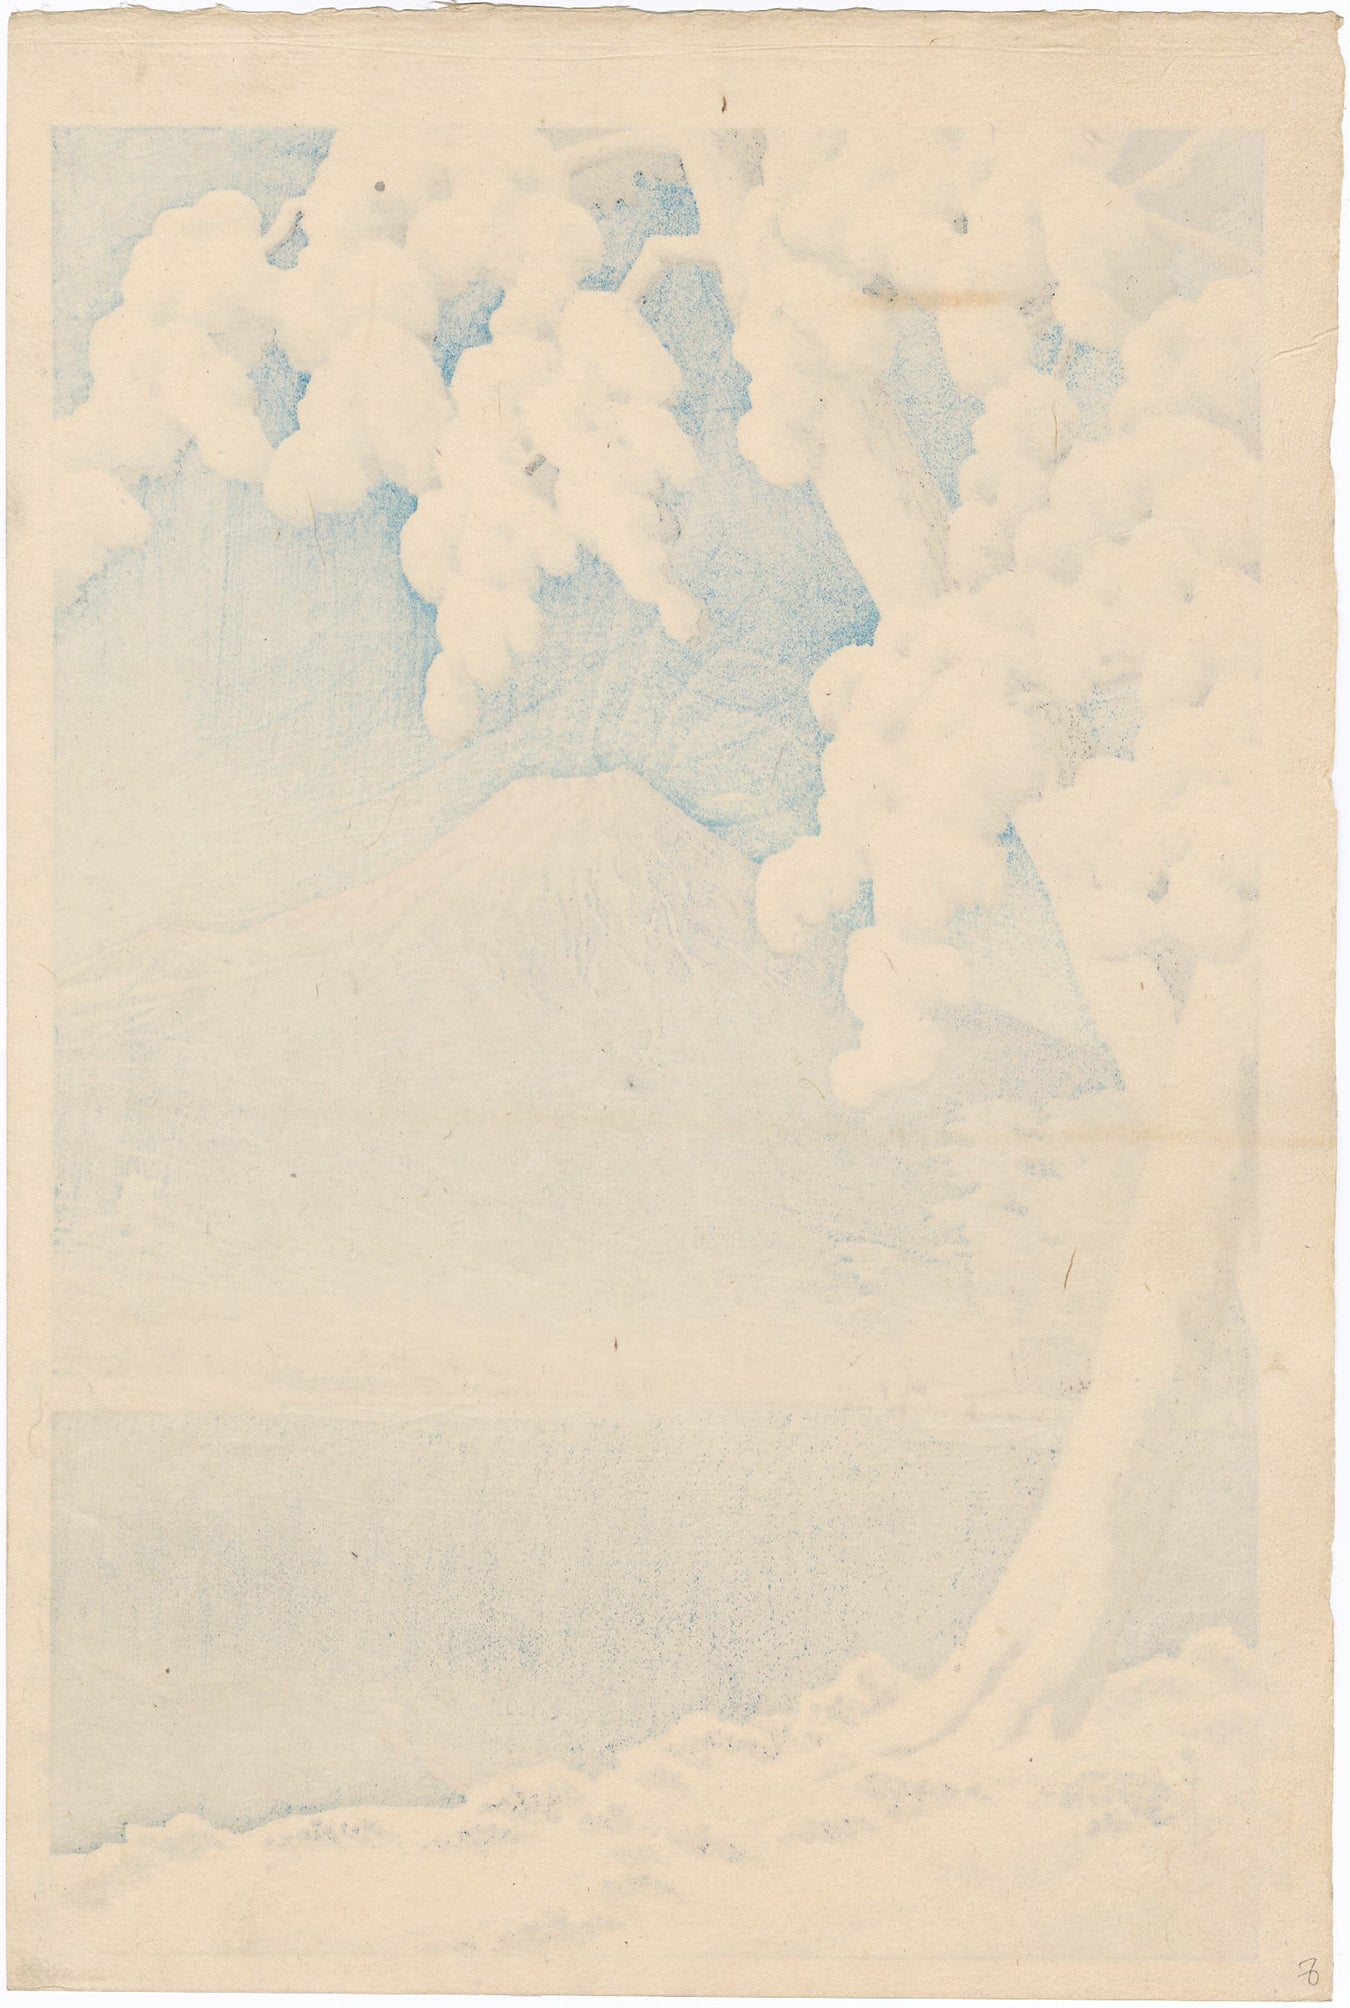 Hasui 巴水 Clearing After A Snowfall On Mount Fuji 富士の雪渓田子の浦 Egenolf Gallery Japanese Prints